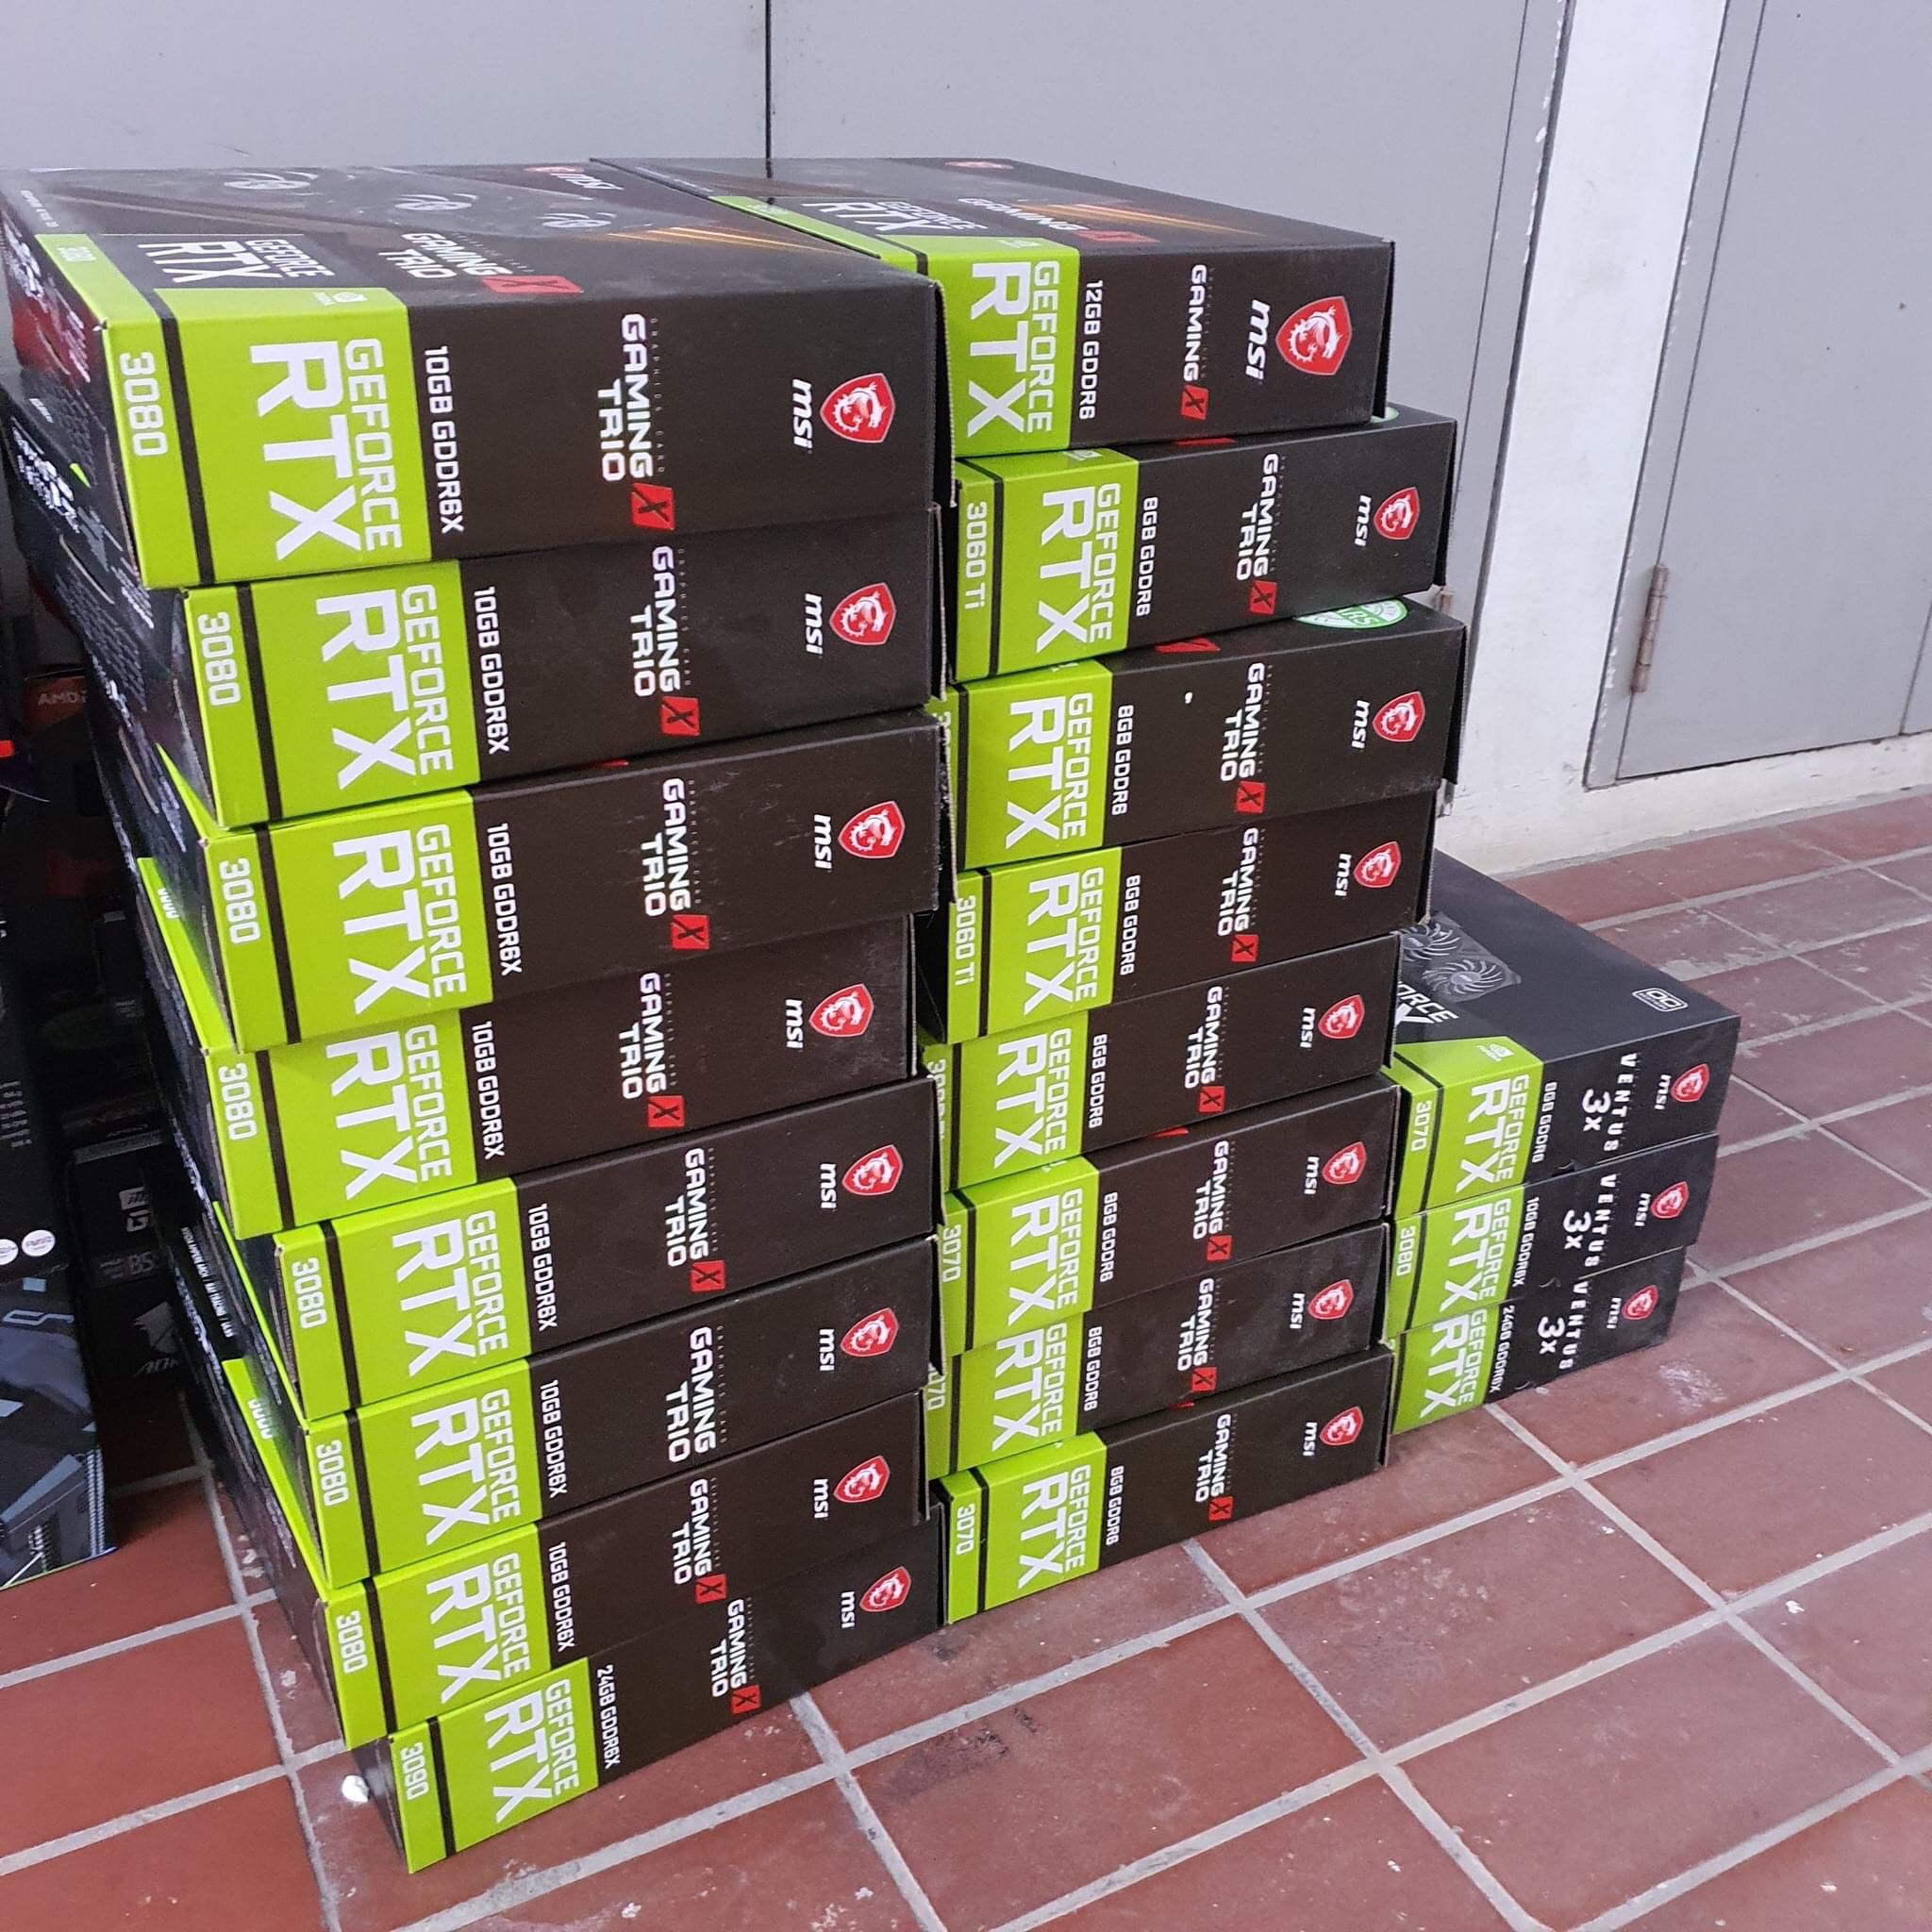 Brand New stock of Nvidia RTX 3060,,3080 and 3090 cards, selling for 750 plus shipping fees and $450 for the 3080 and for the 3060 $350 plus shipping 